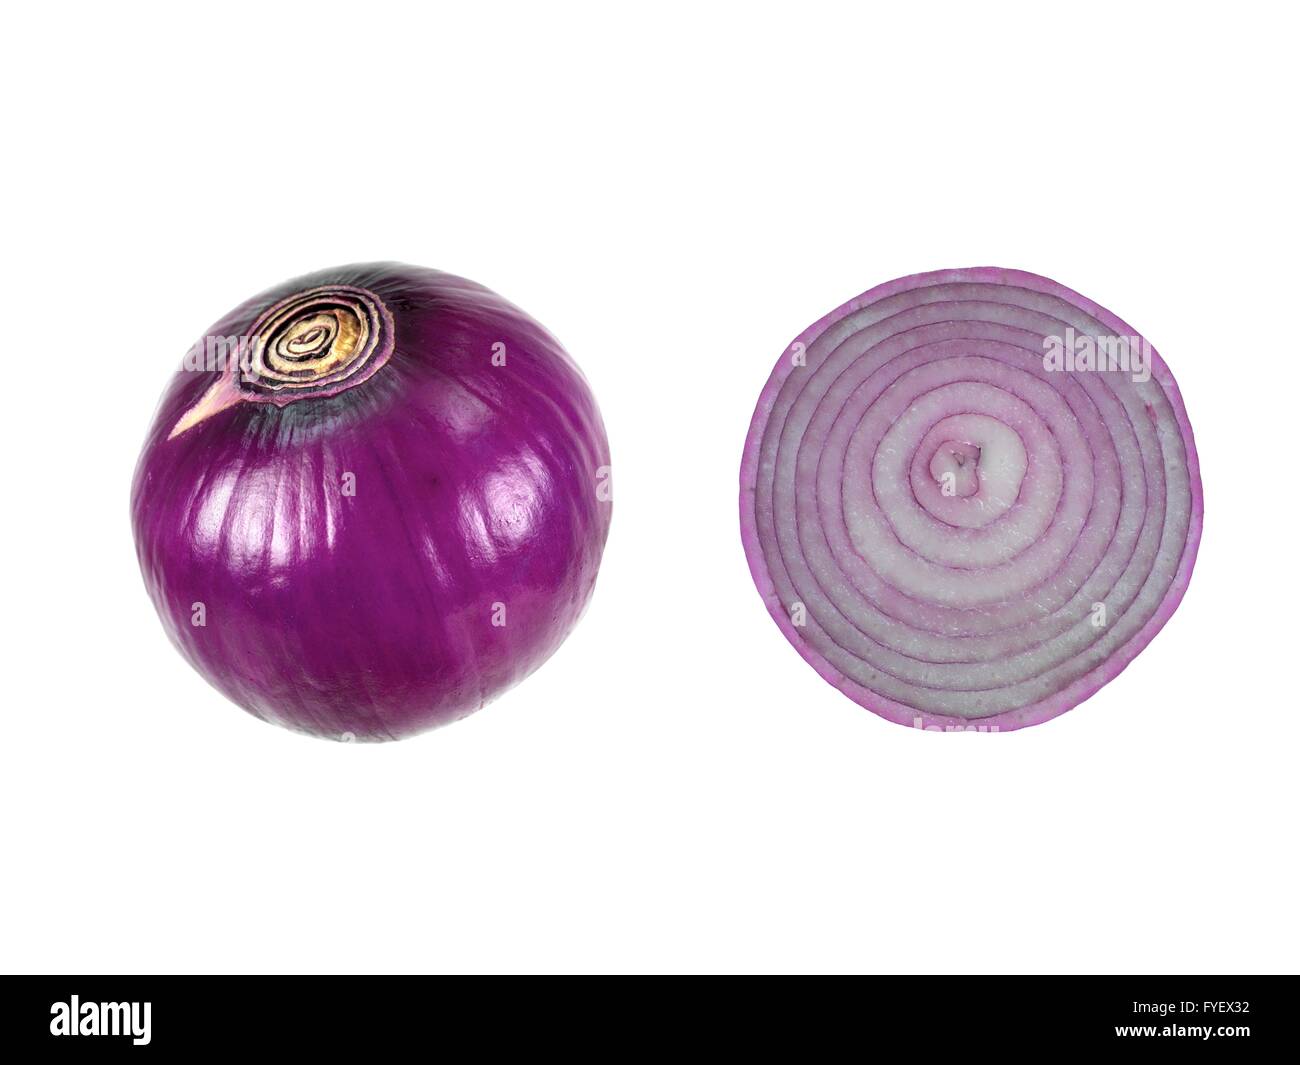 Red onion isolated against a white background Stock Photo